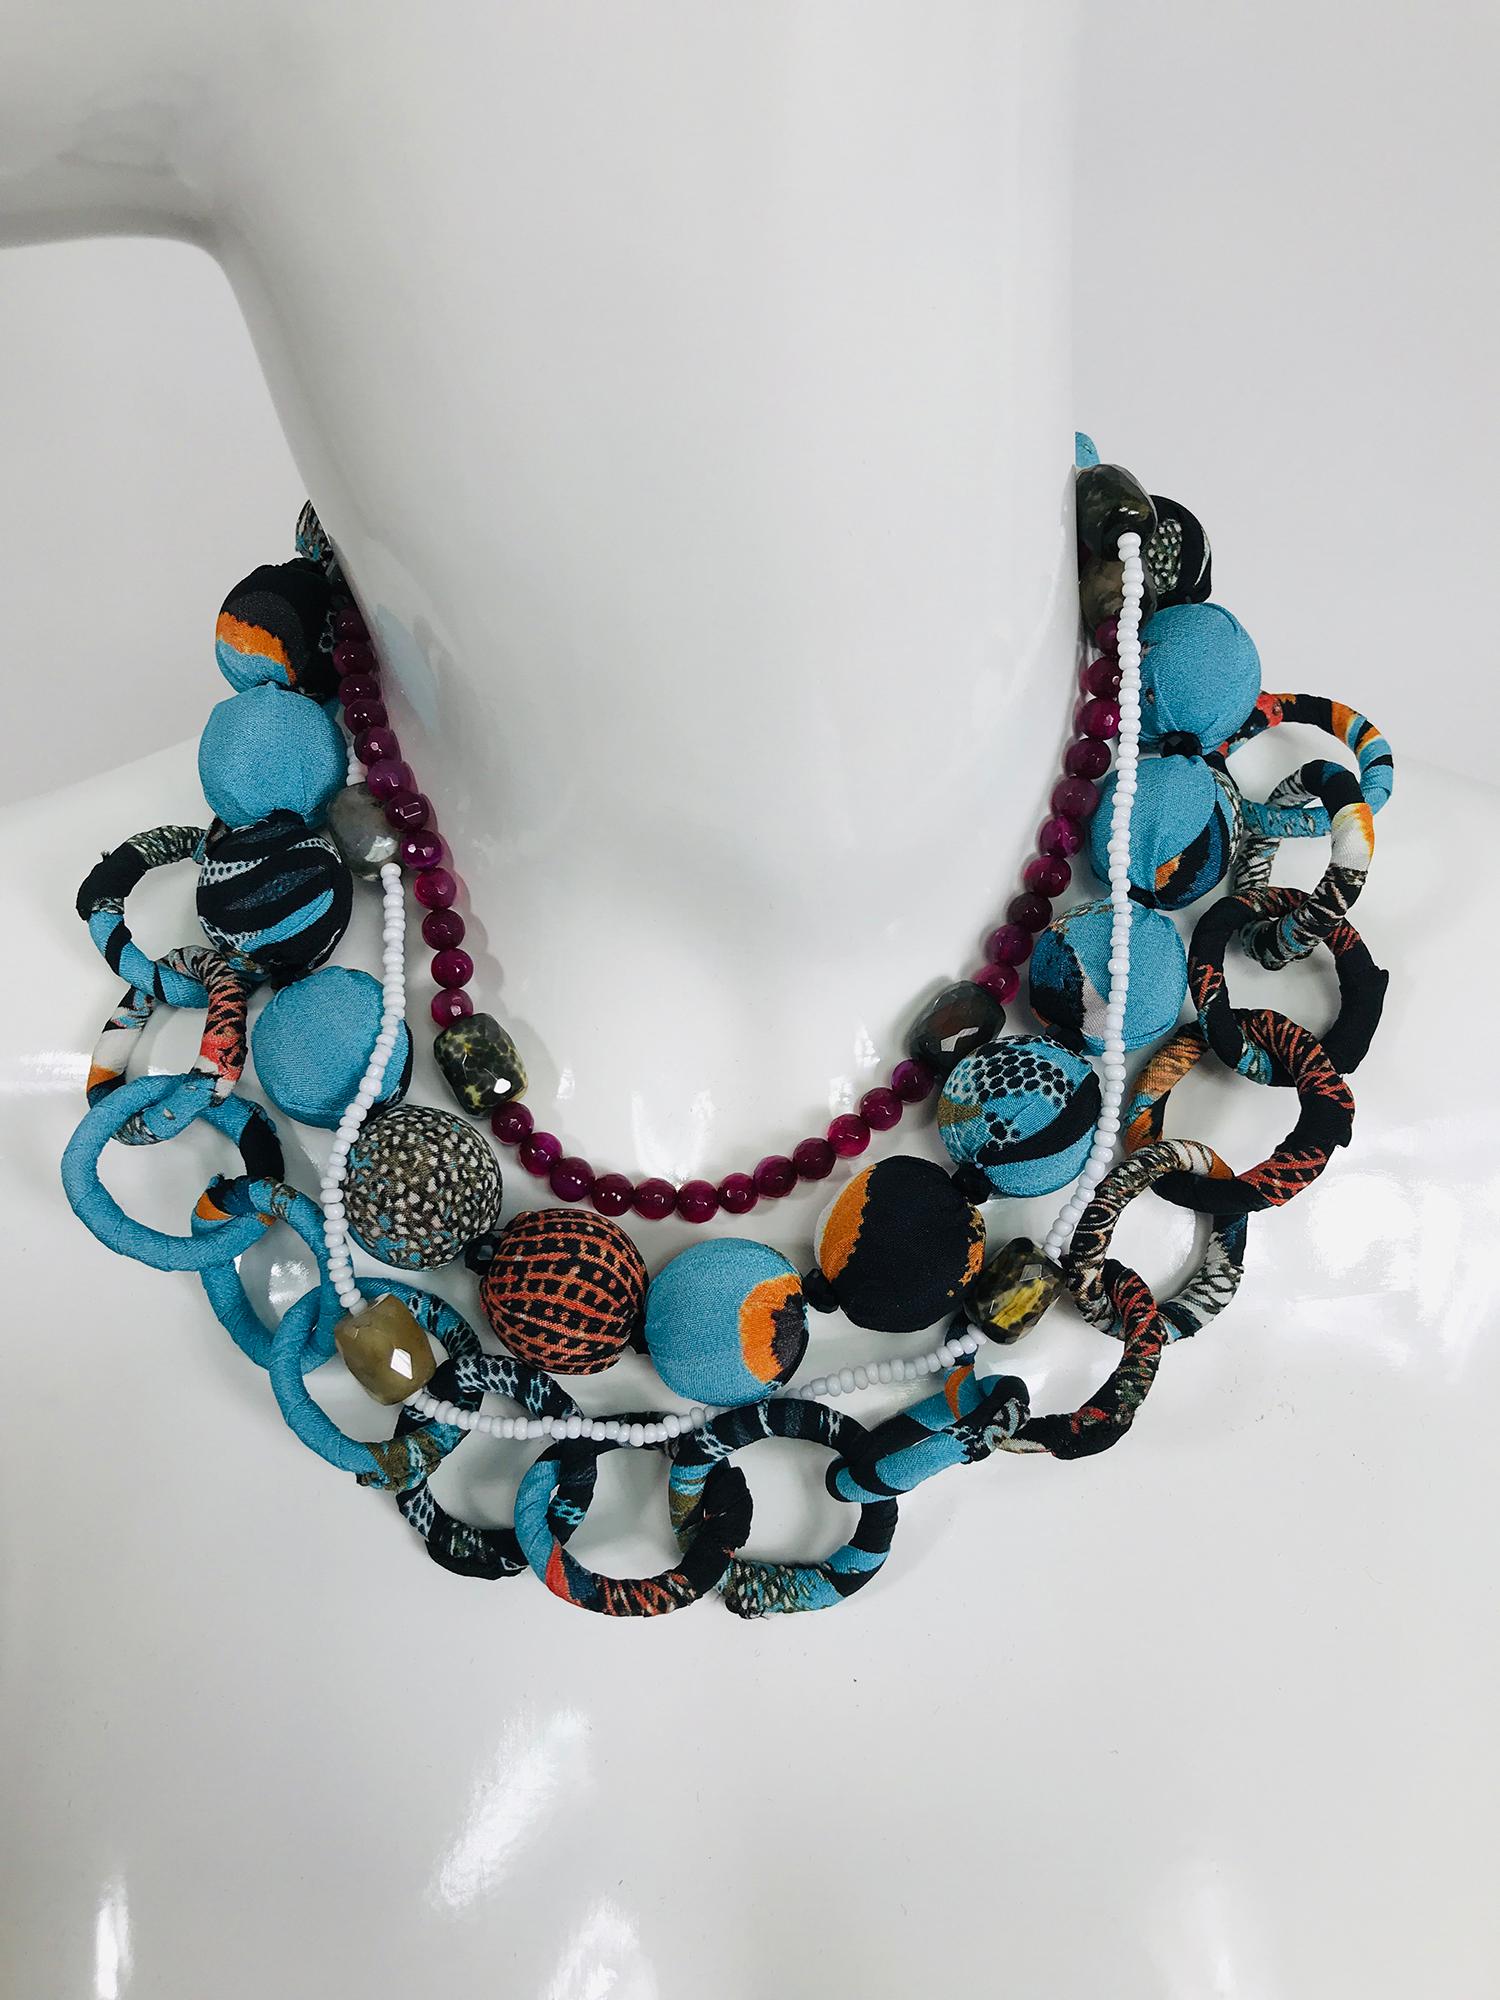 Etro printed silk balls and loop links with glass beads and garnet coloured stone beads. This beautiful necklace has round balls and loop links that are covered in Etro print silk fabric, there are two beaded necklace intertwined one in white glass